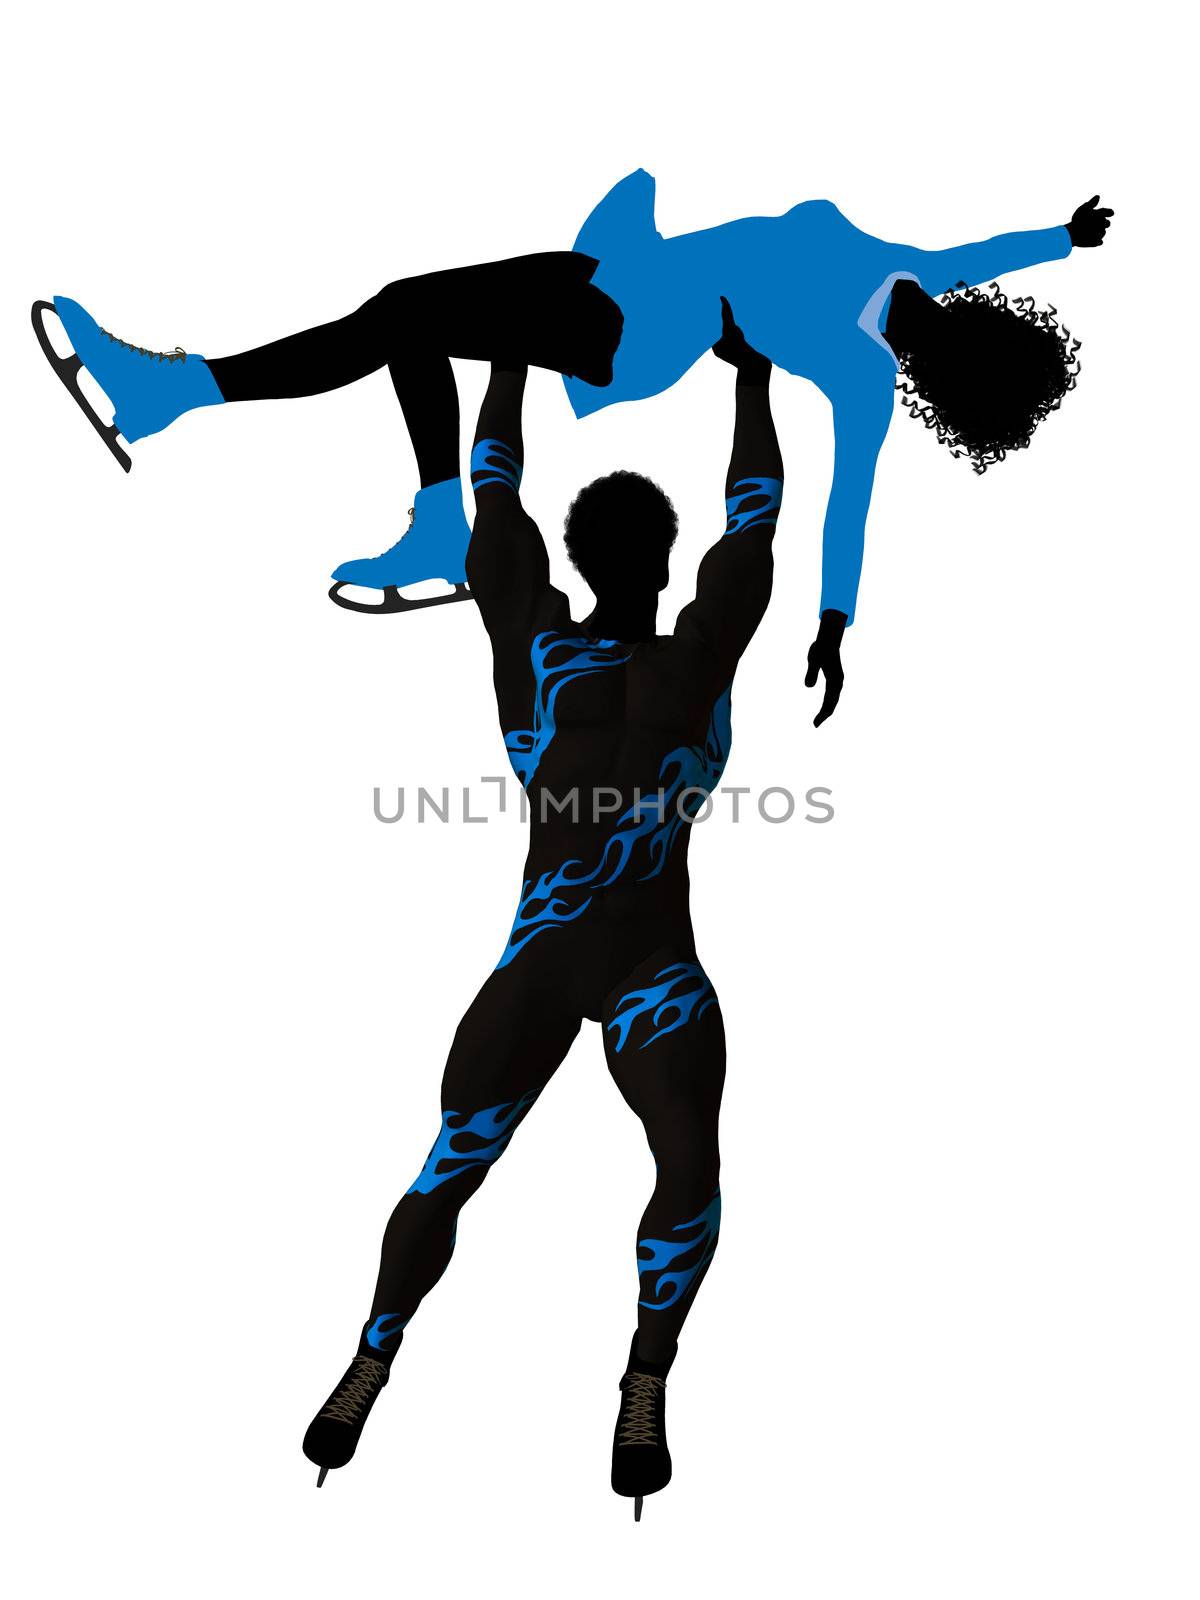 African American Couple Ice Skating Silhouette by kathygold